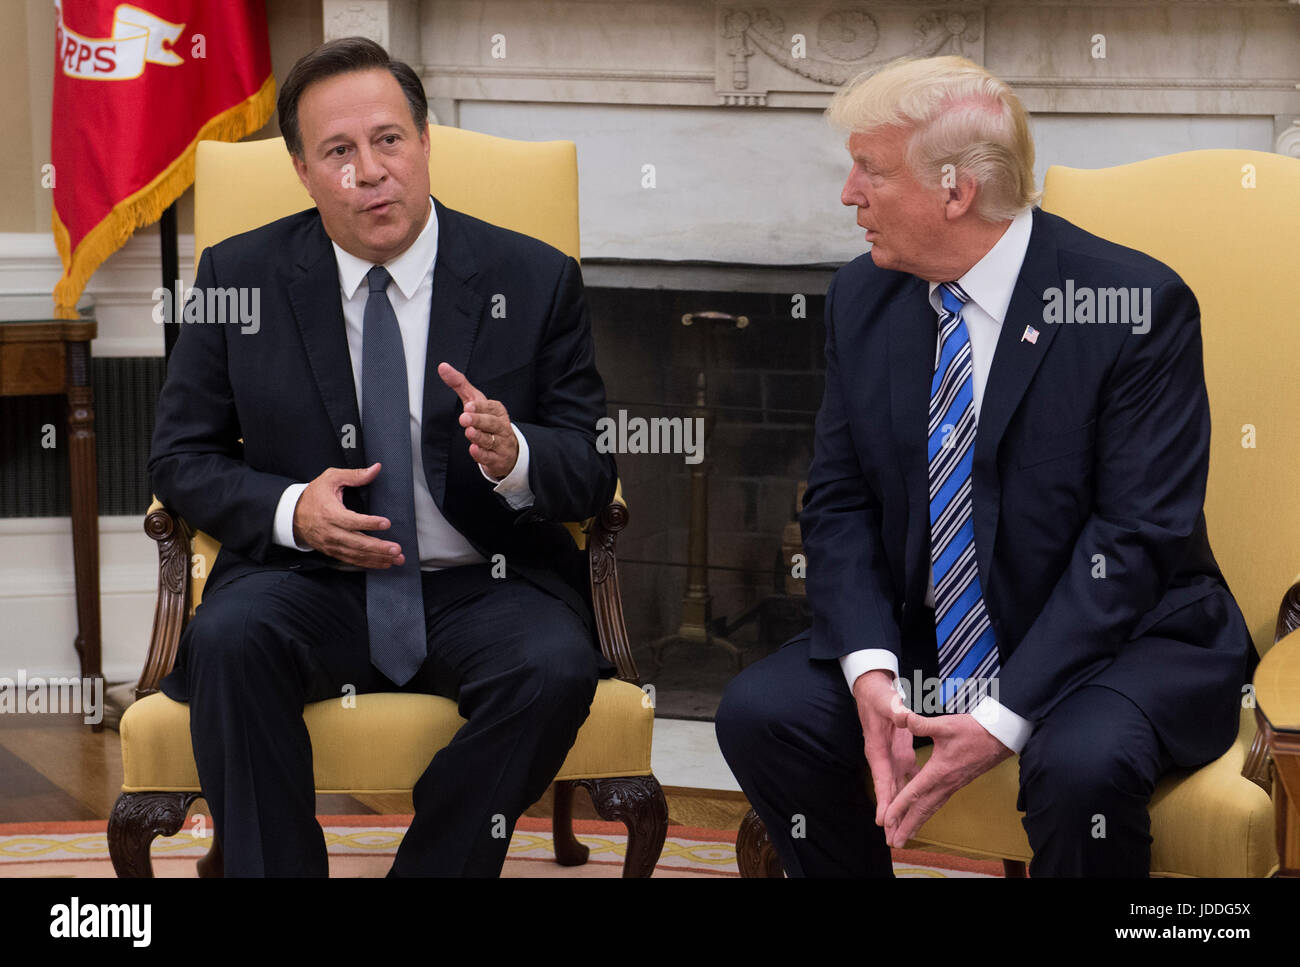 Washington DC, USA. 19th June, 2017. United States President Donald J. Trump meets with President Juan Carlos Varela of Panama in the Oval Office of the White House in Washington, DC on June 19, 2017. First lady Melania Trump is at right. Credit: Molly Riley/Pool via CNP /MediaPunch/Alamy Live News Stock Photo